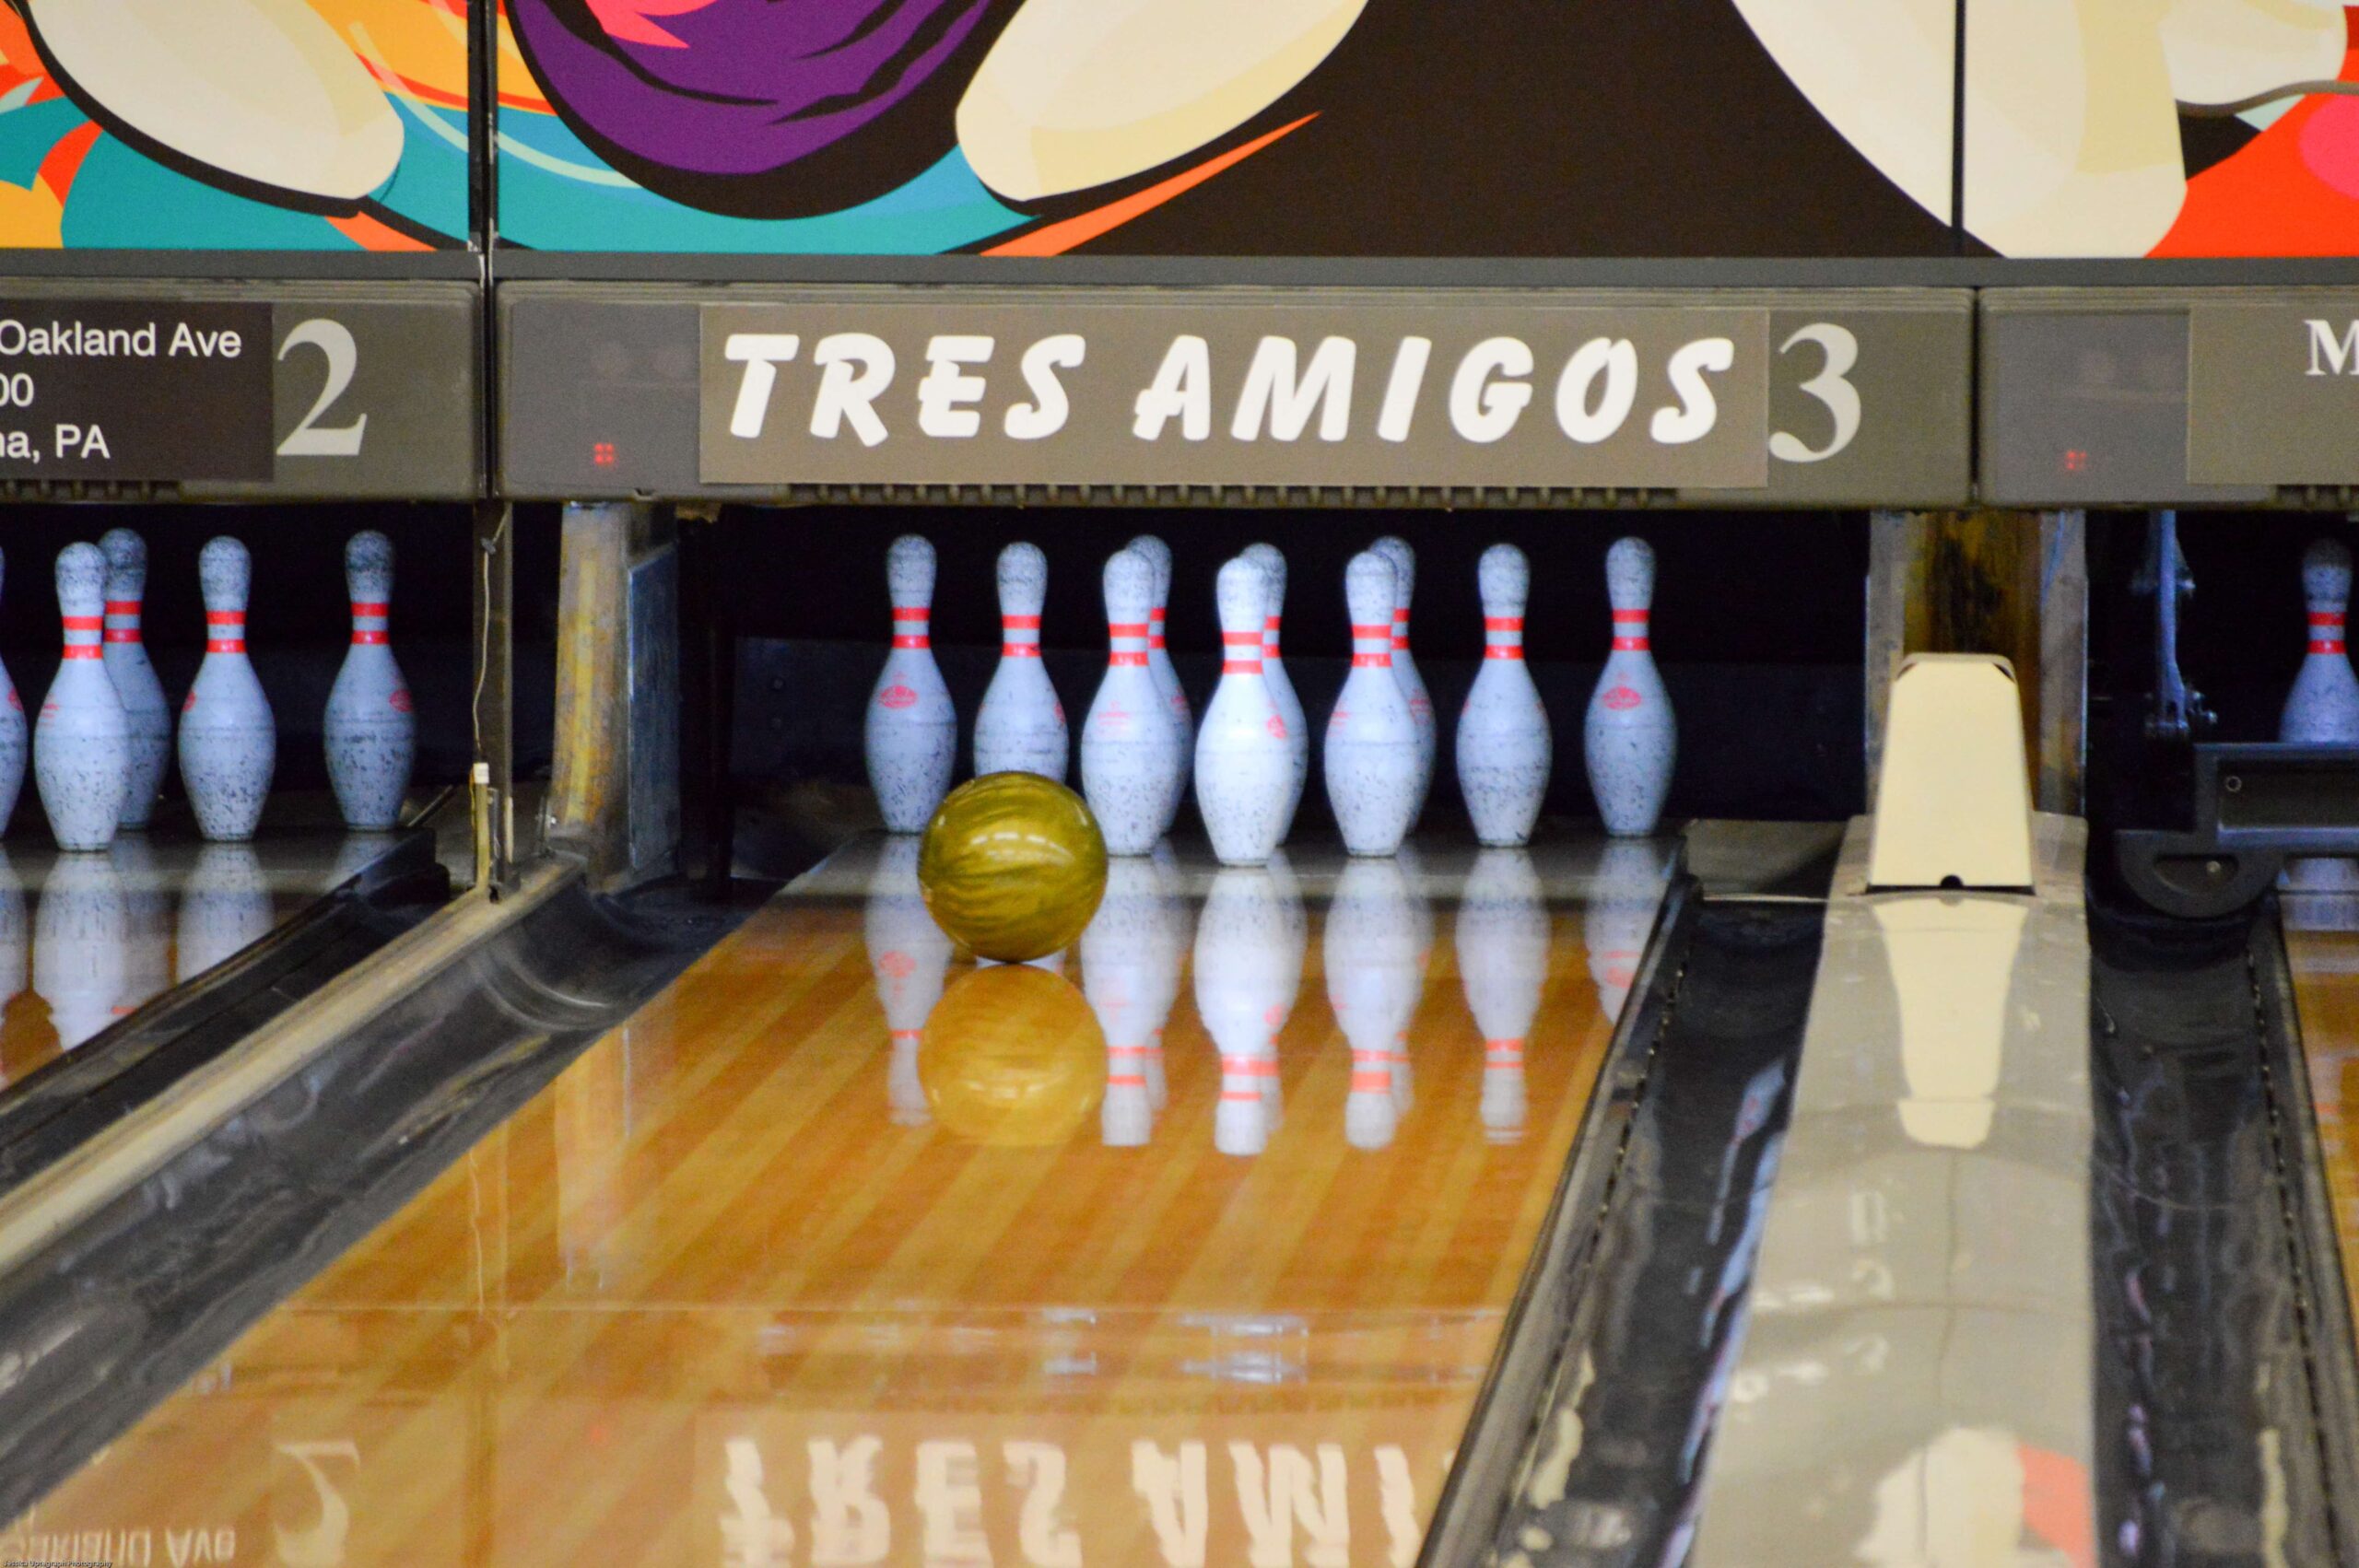 Strikes and Smiles: Top 10 Reasons to Host Your Kid’s Next Birthday Party at the Bowling Alley!